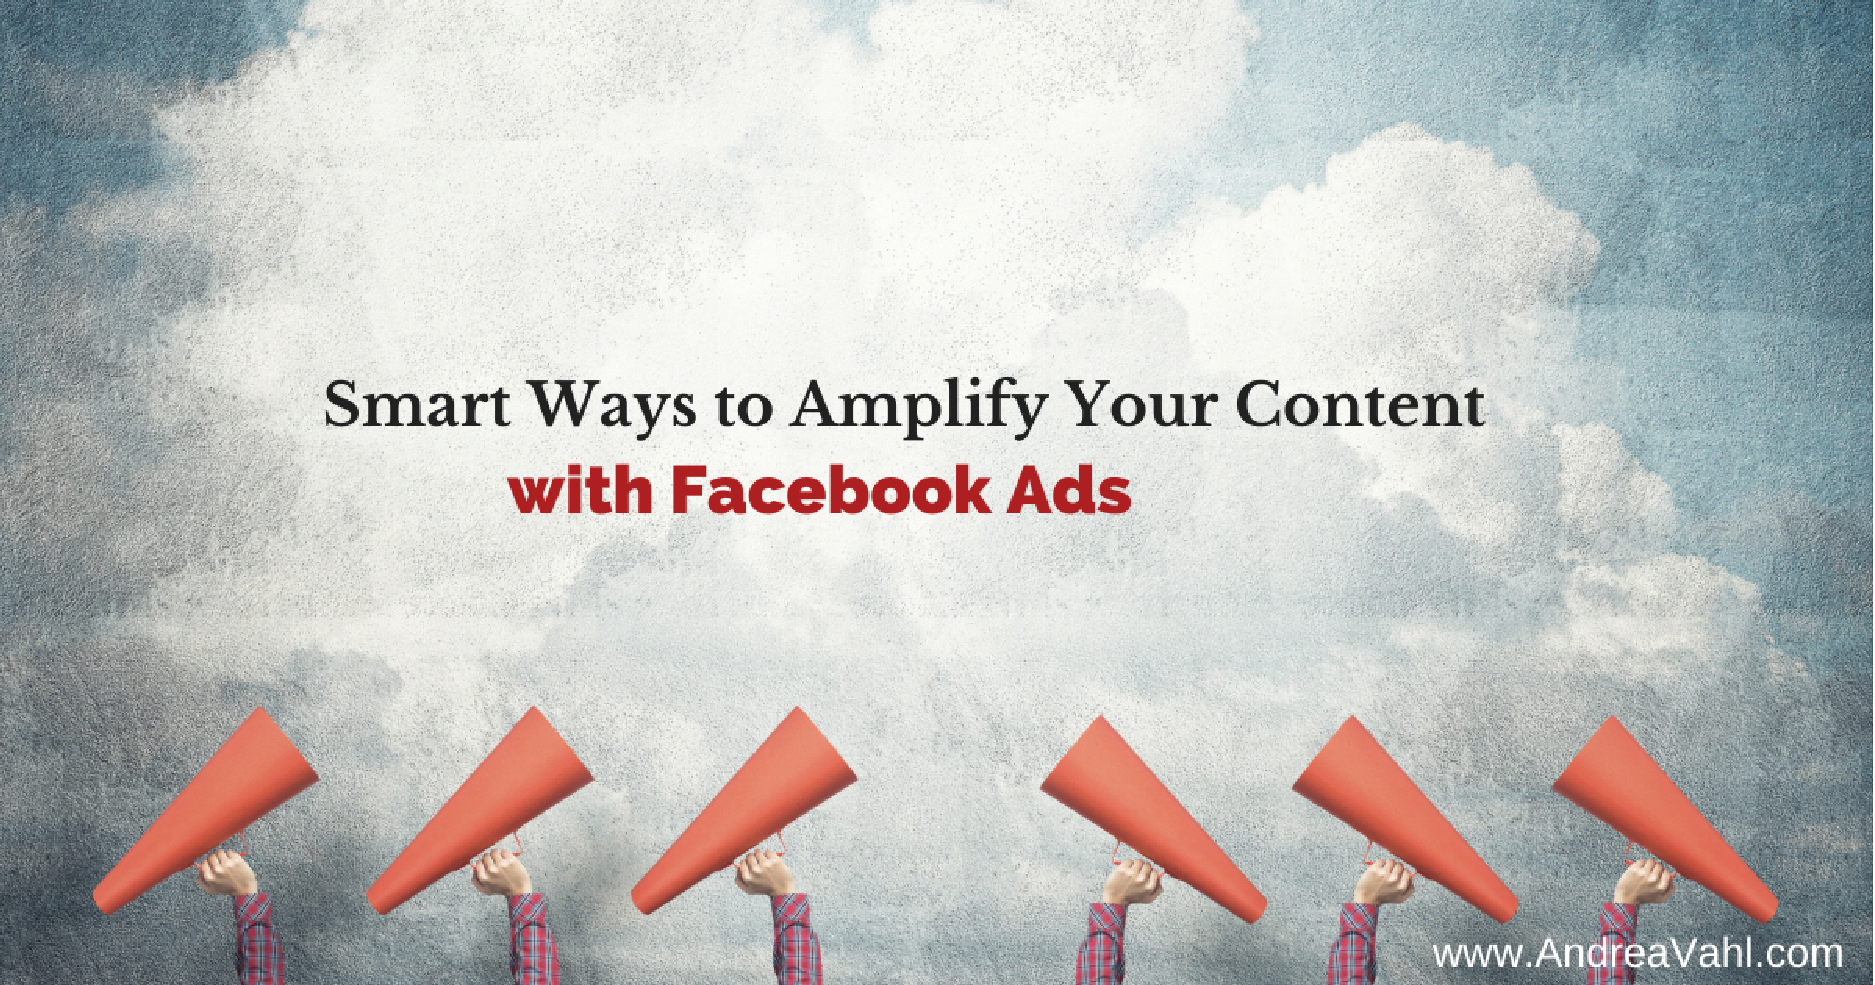 Smart Ways to Amplify Your Content with Facebook Ads